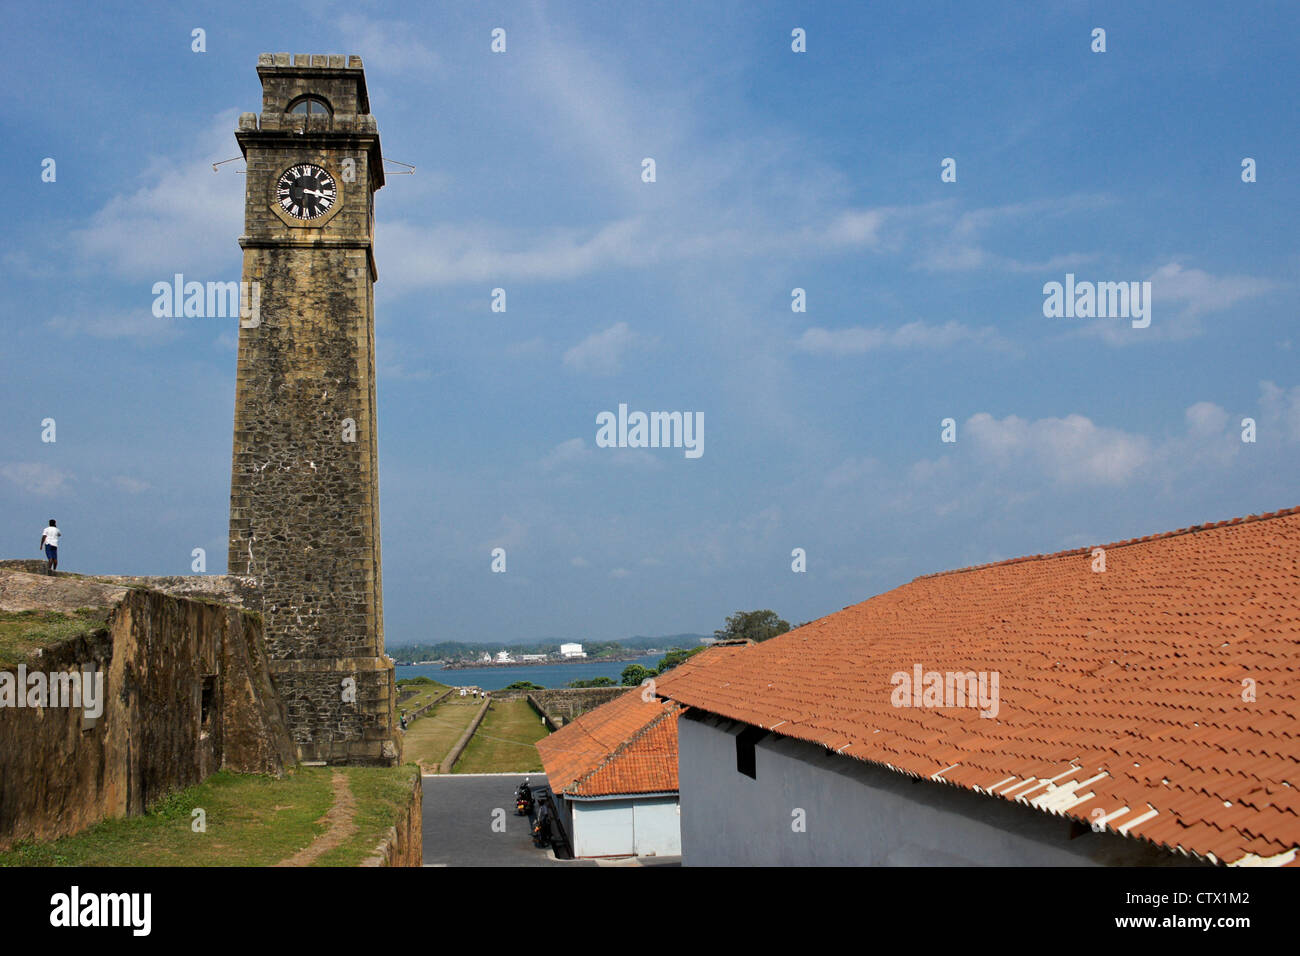 Clock tower within historic Galle Fort, Galle, Sri Lanka Stock Photo